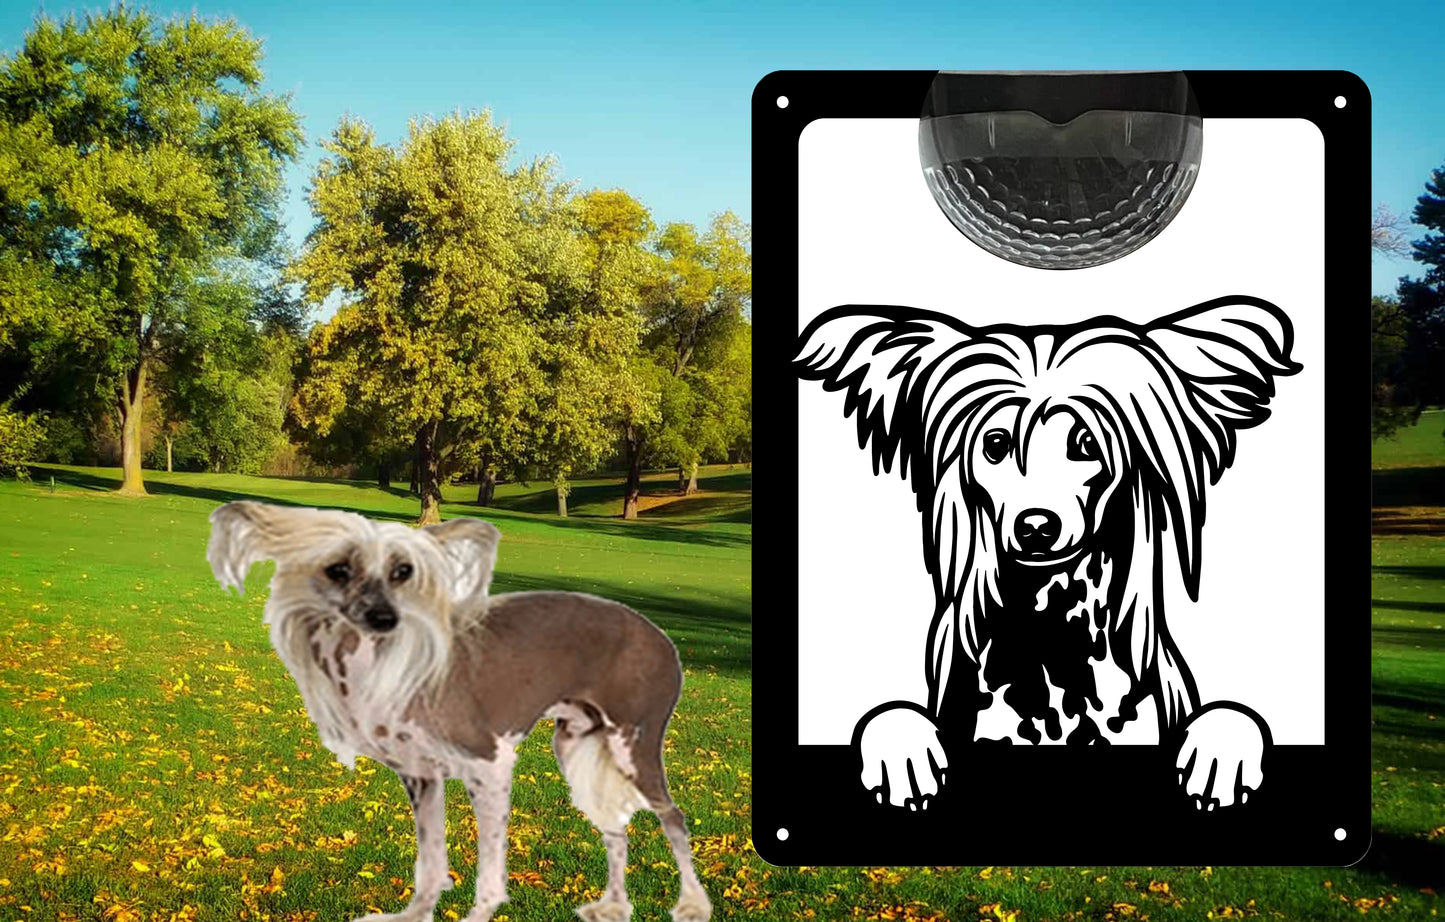 Garden Solar Light Wall Plaque Featuring a chinese crested